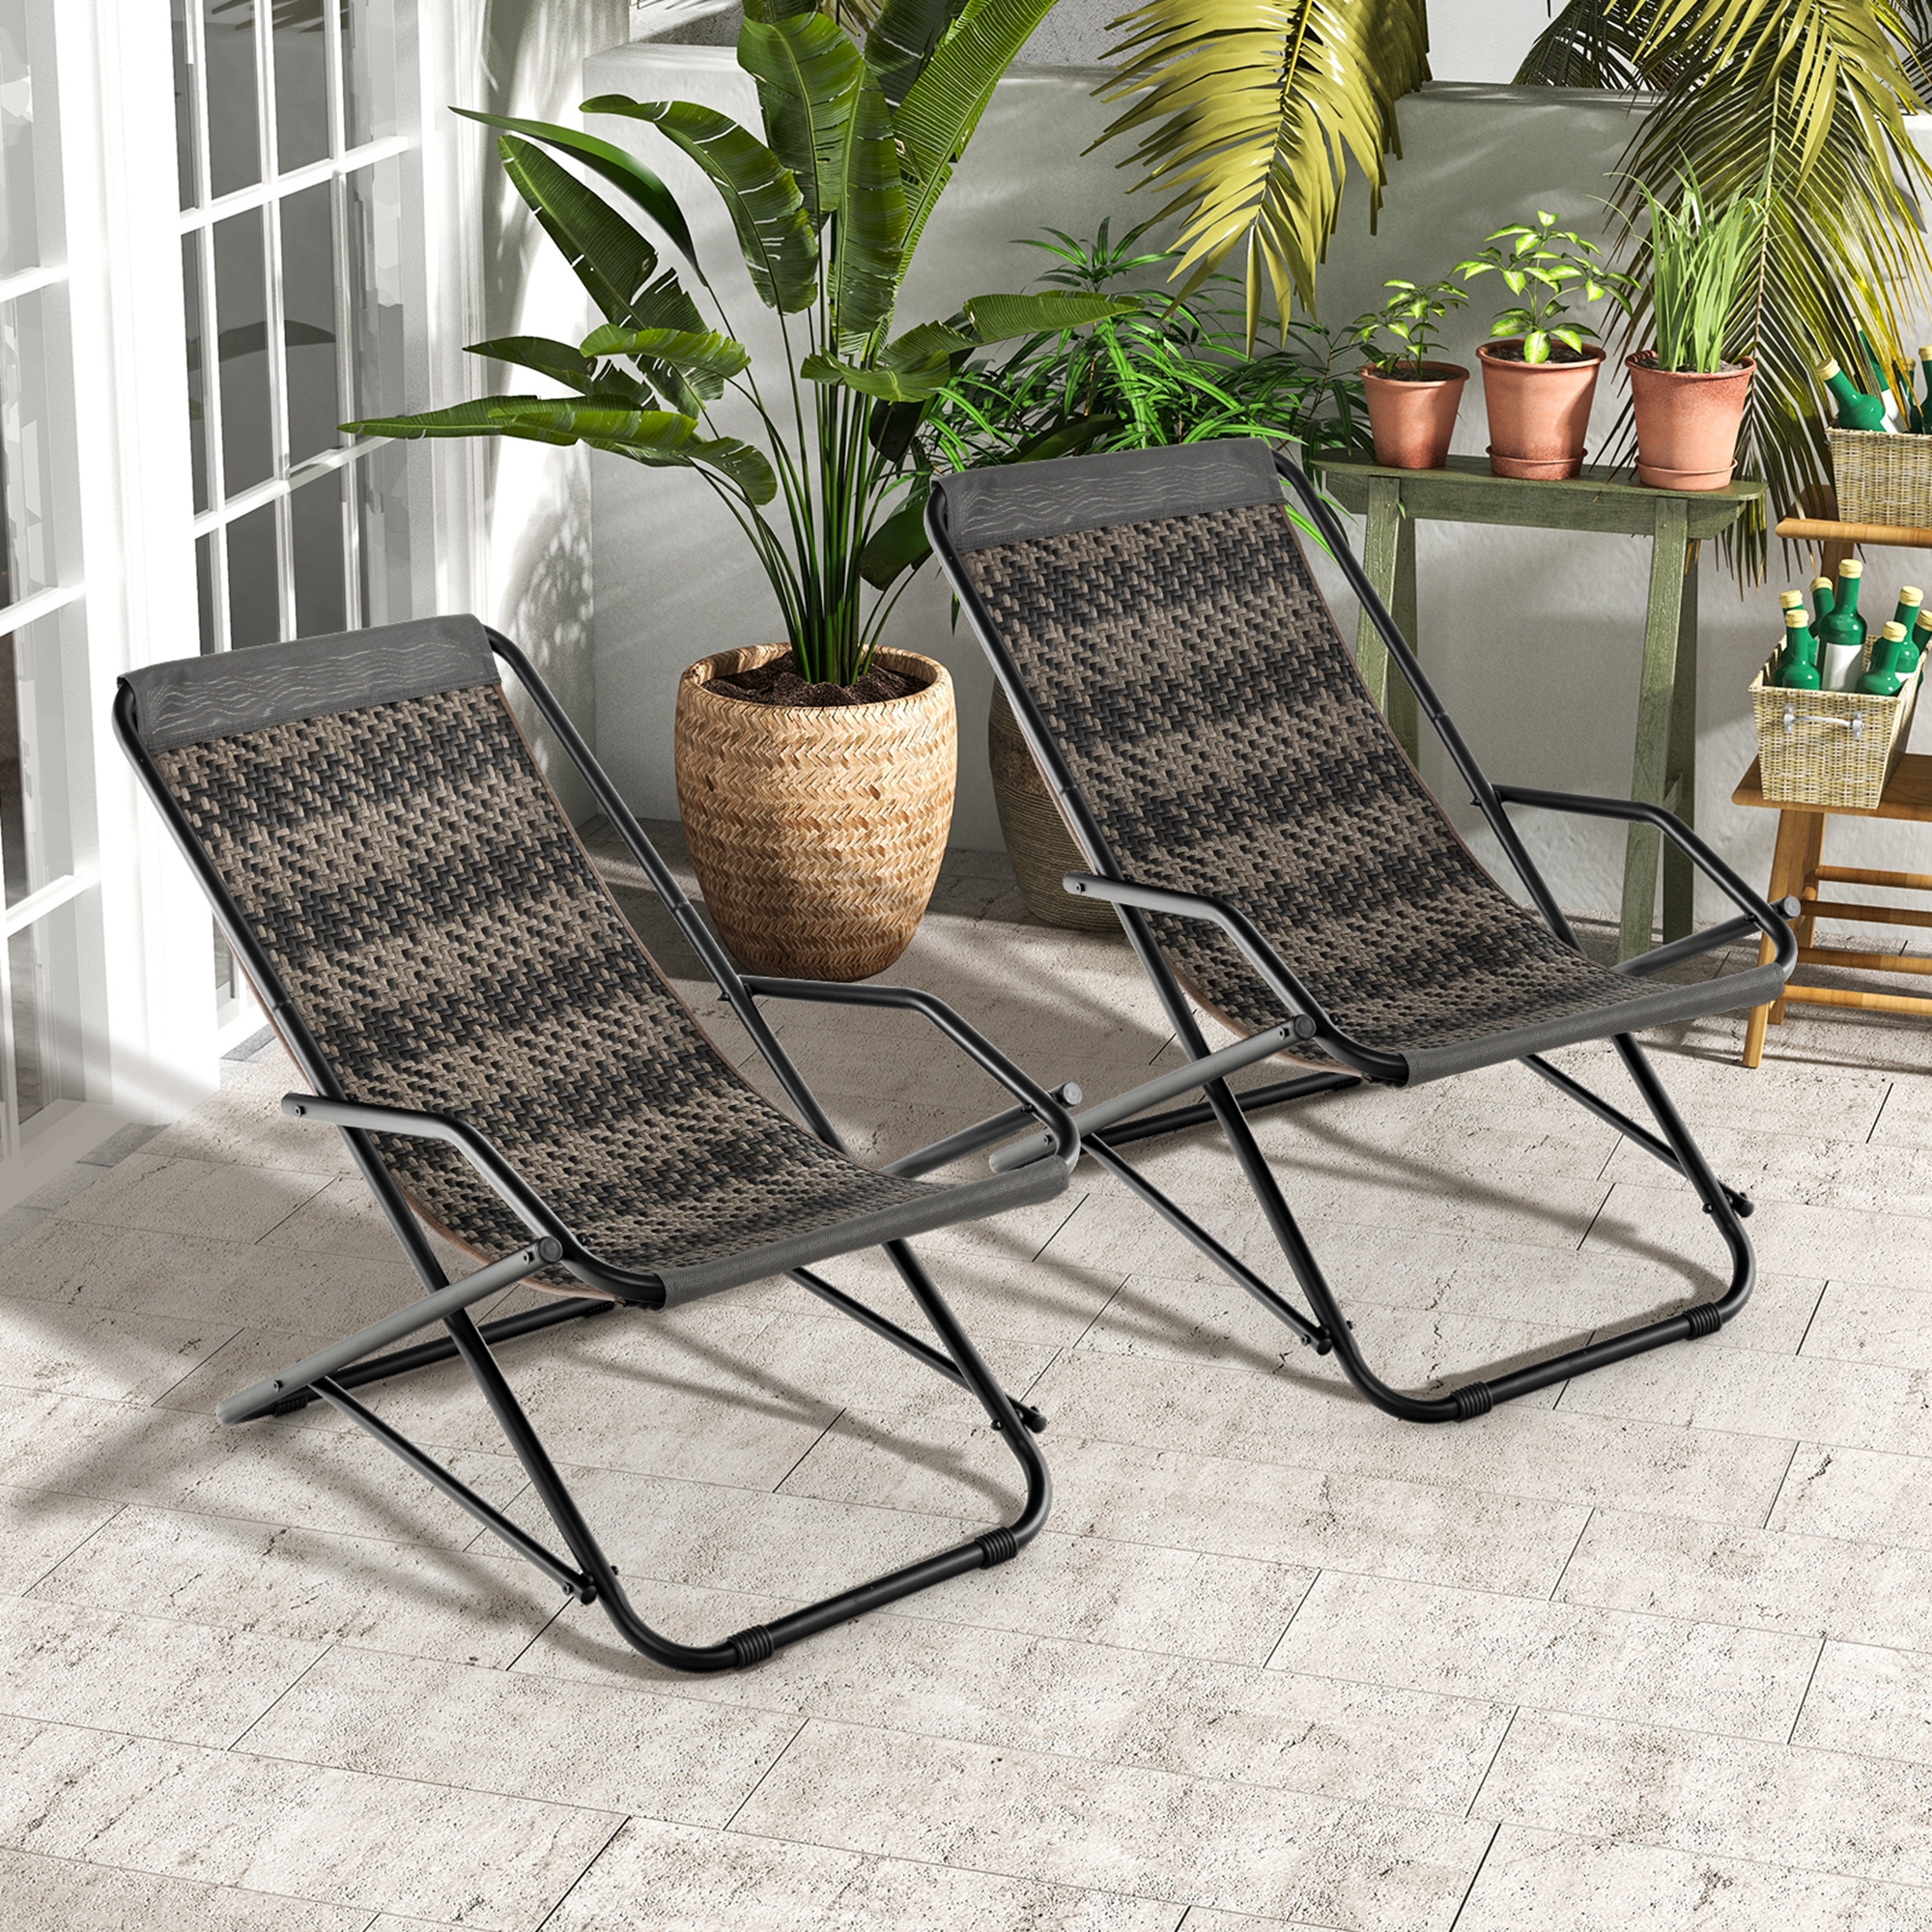 Costway 1 PC Patio Folding Rattan Sling Chair Rocking Lounge Chaise Armrest Garden Portable - image 2 of 8